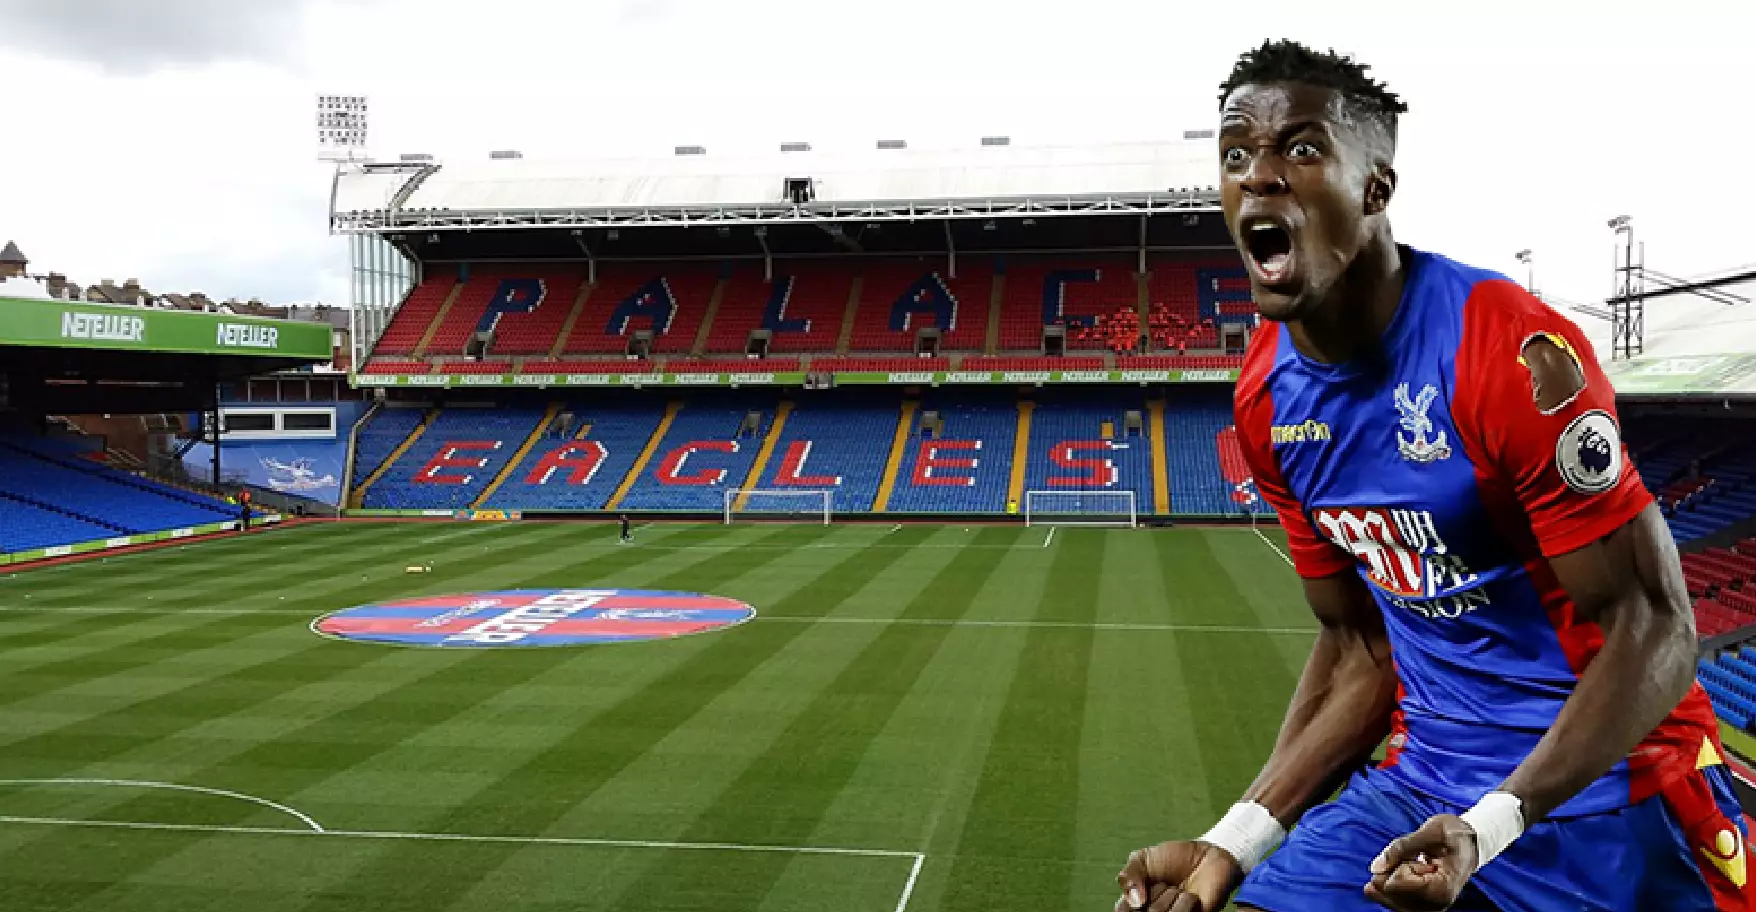 Wilfred Zaha Receives Staggering £44m Offer To Leave Crystal Palace In January